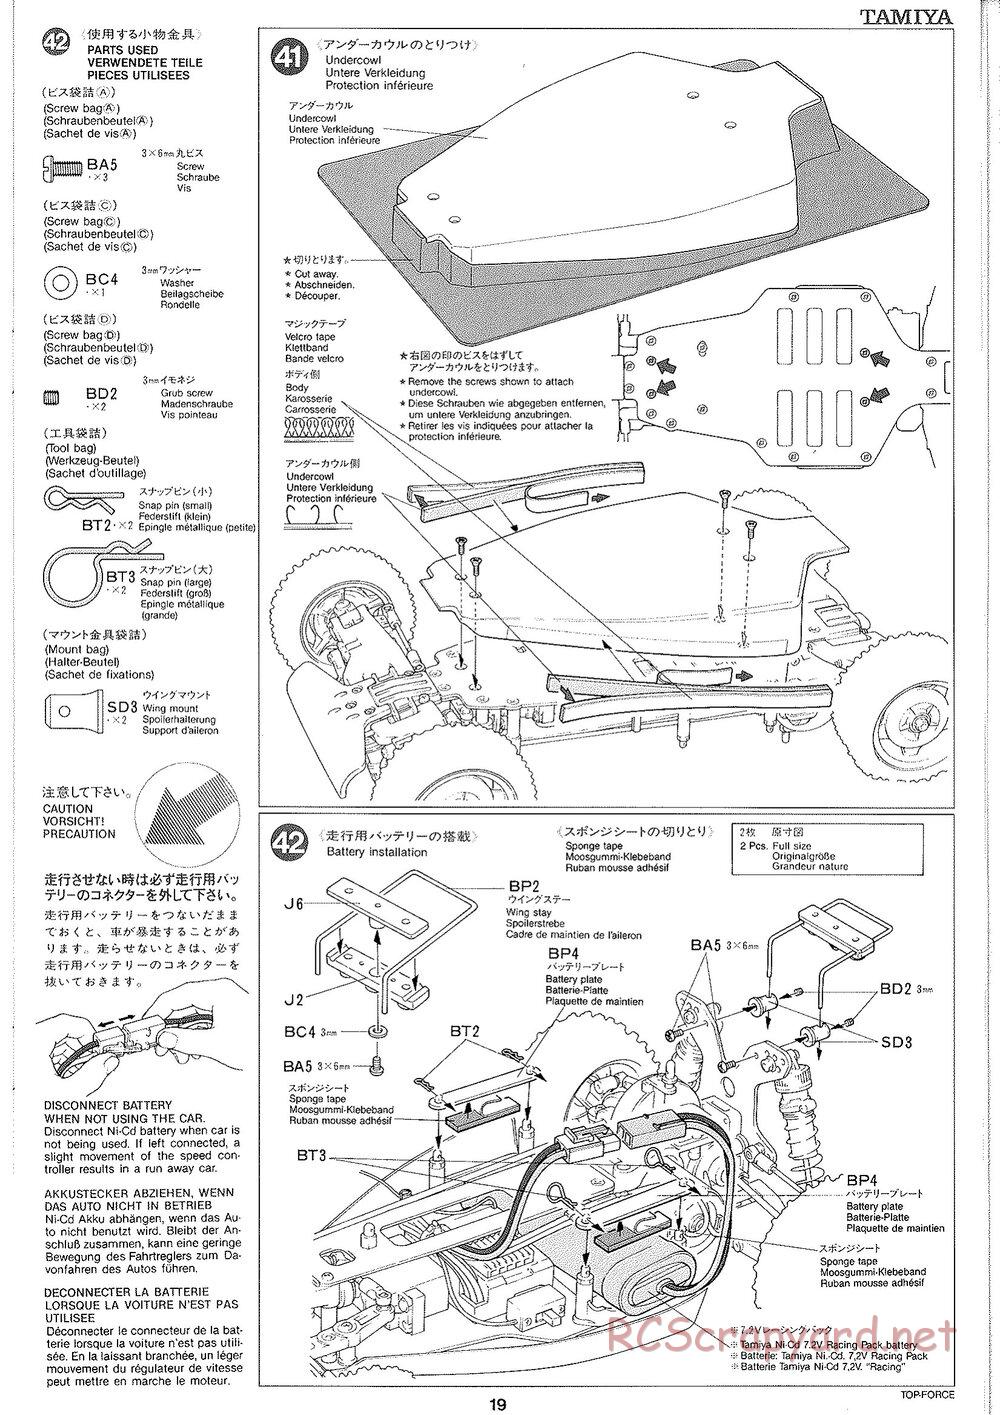 Tamiya - Top Force 2005 - DF-01 Chassis - Manual - Page 19